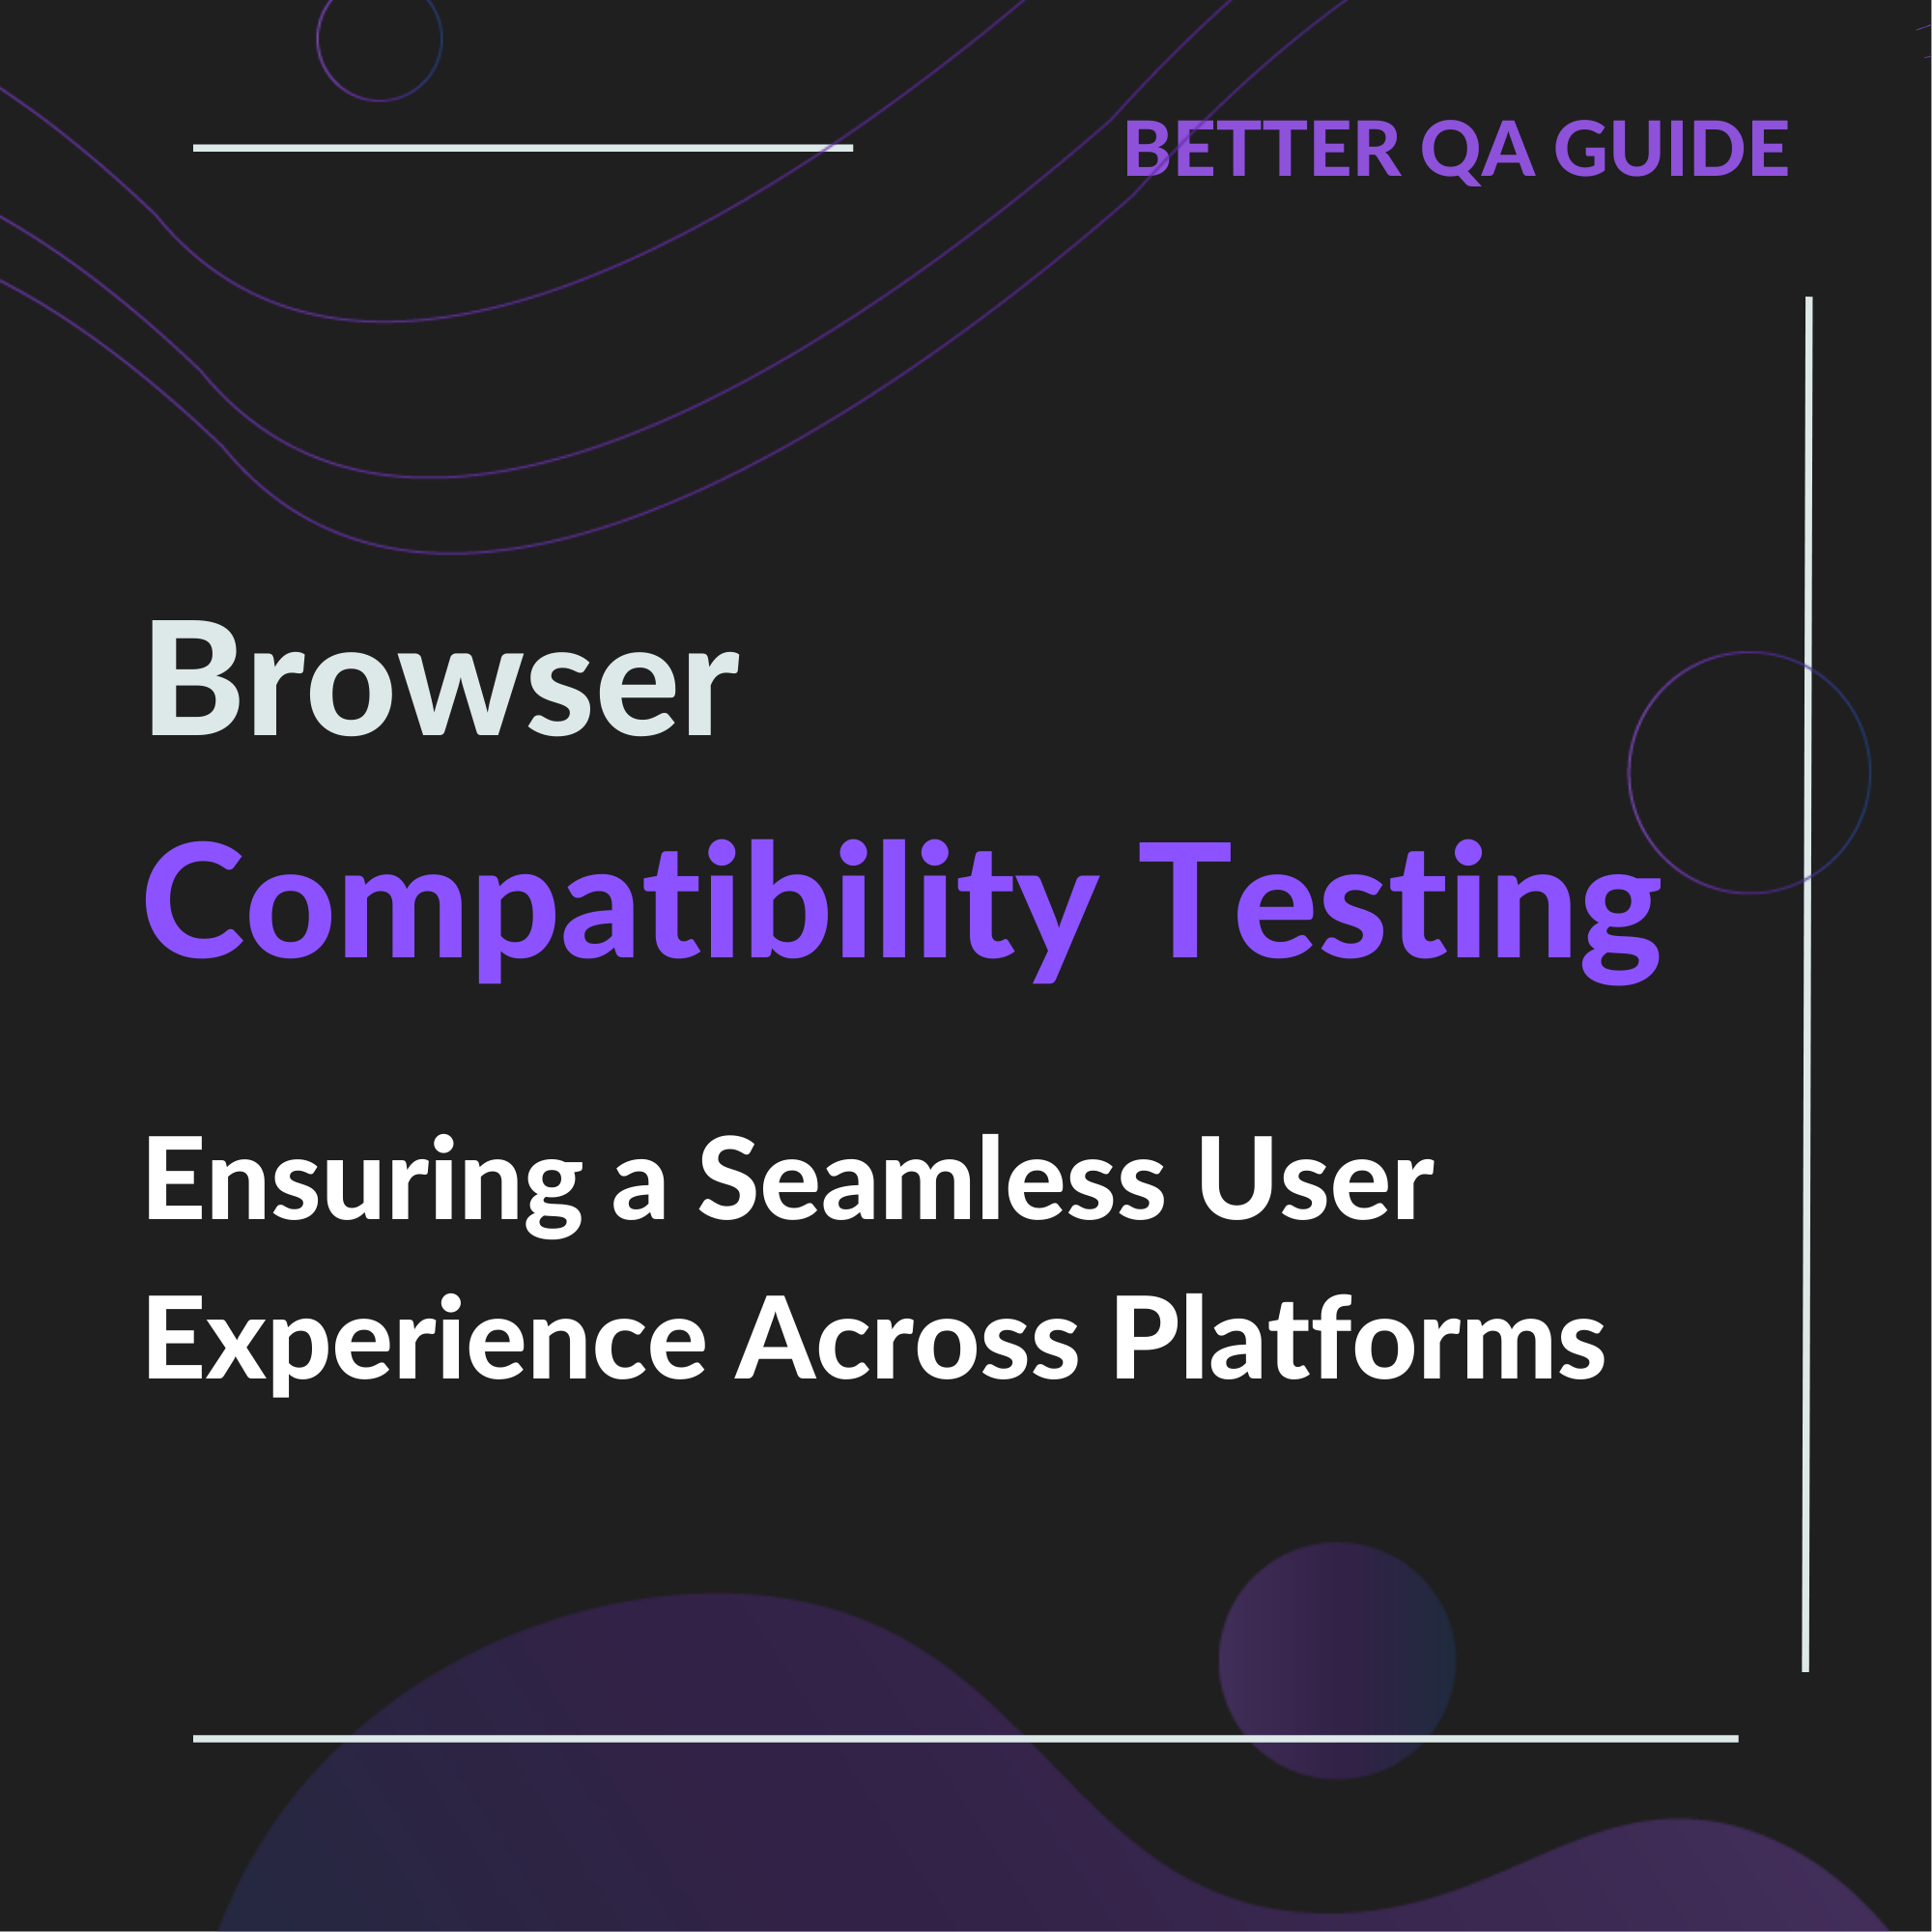 Browser compatibility testing ensuring a seamless user experience across platforms